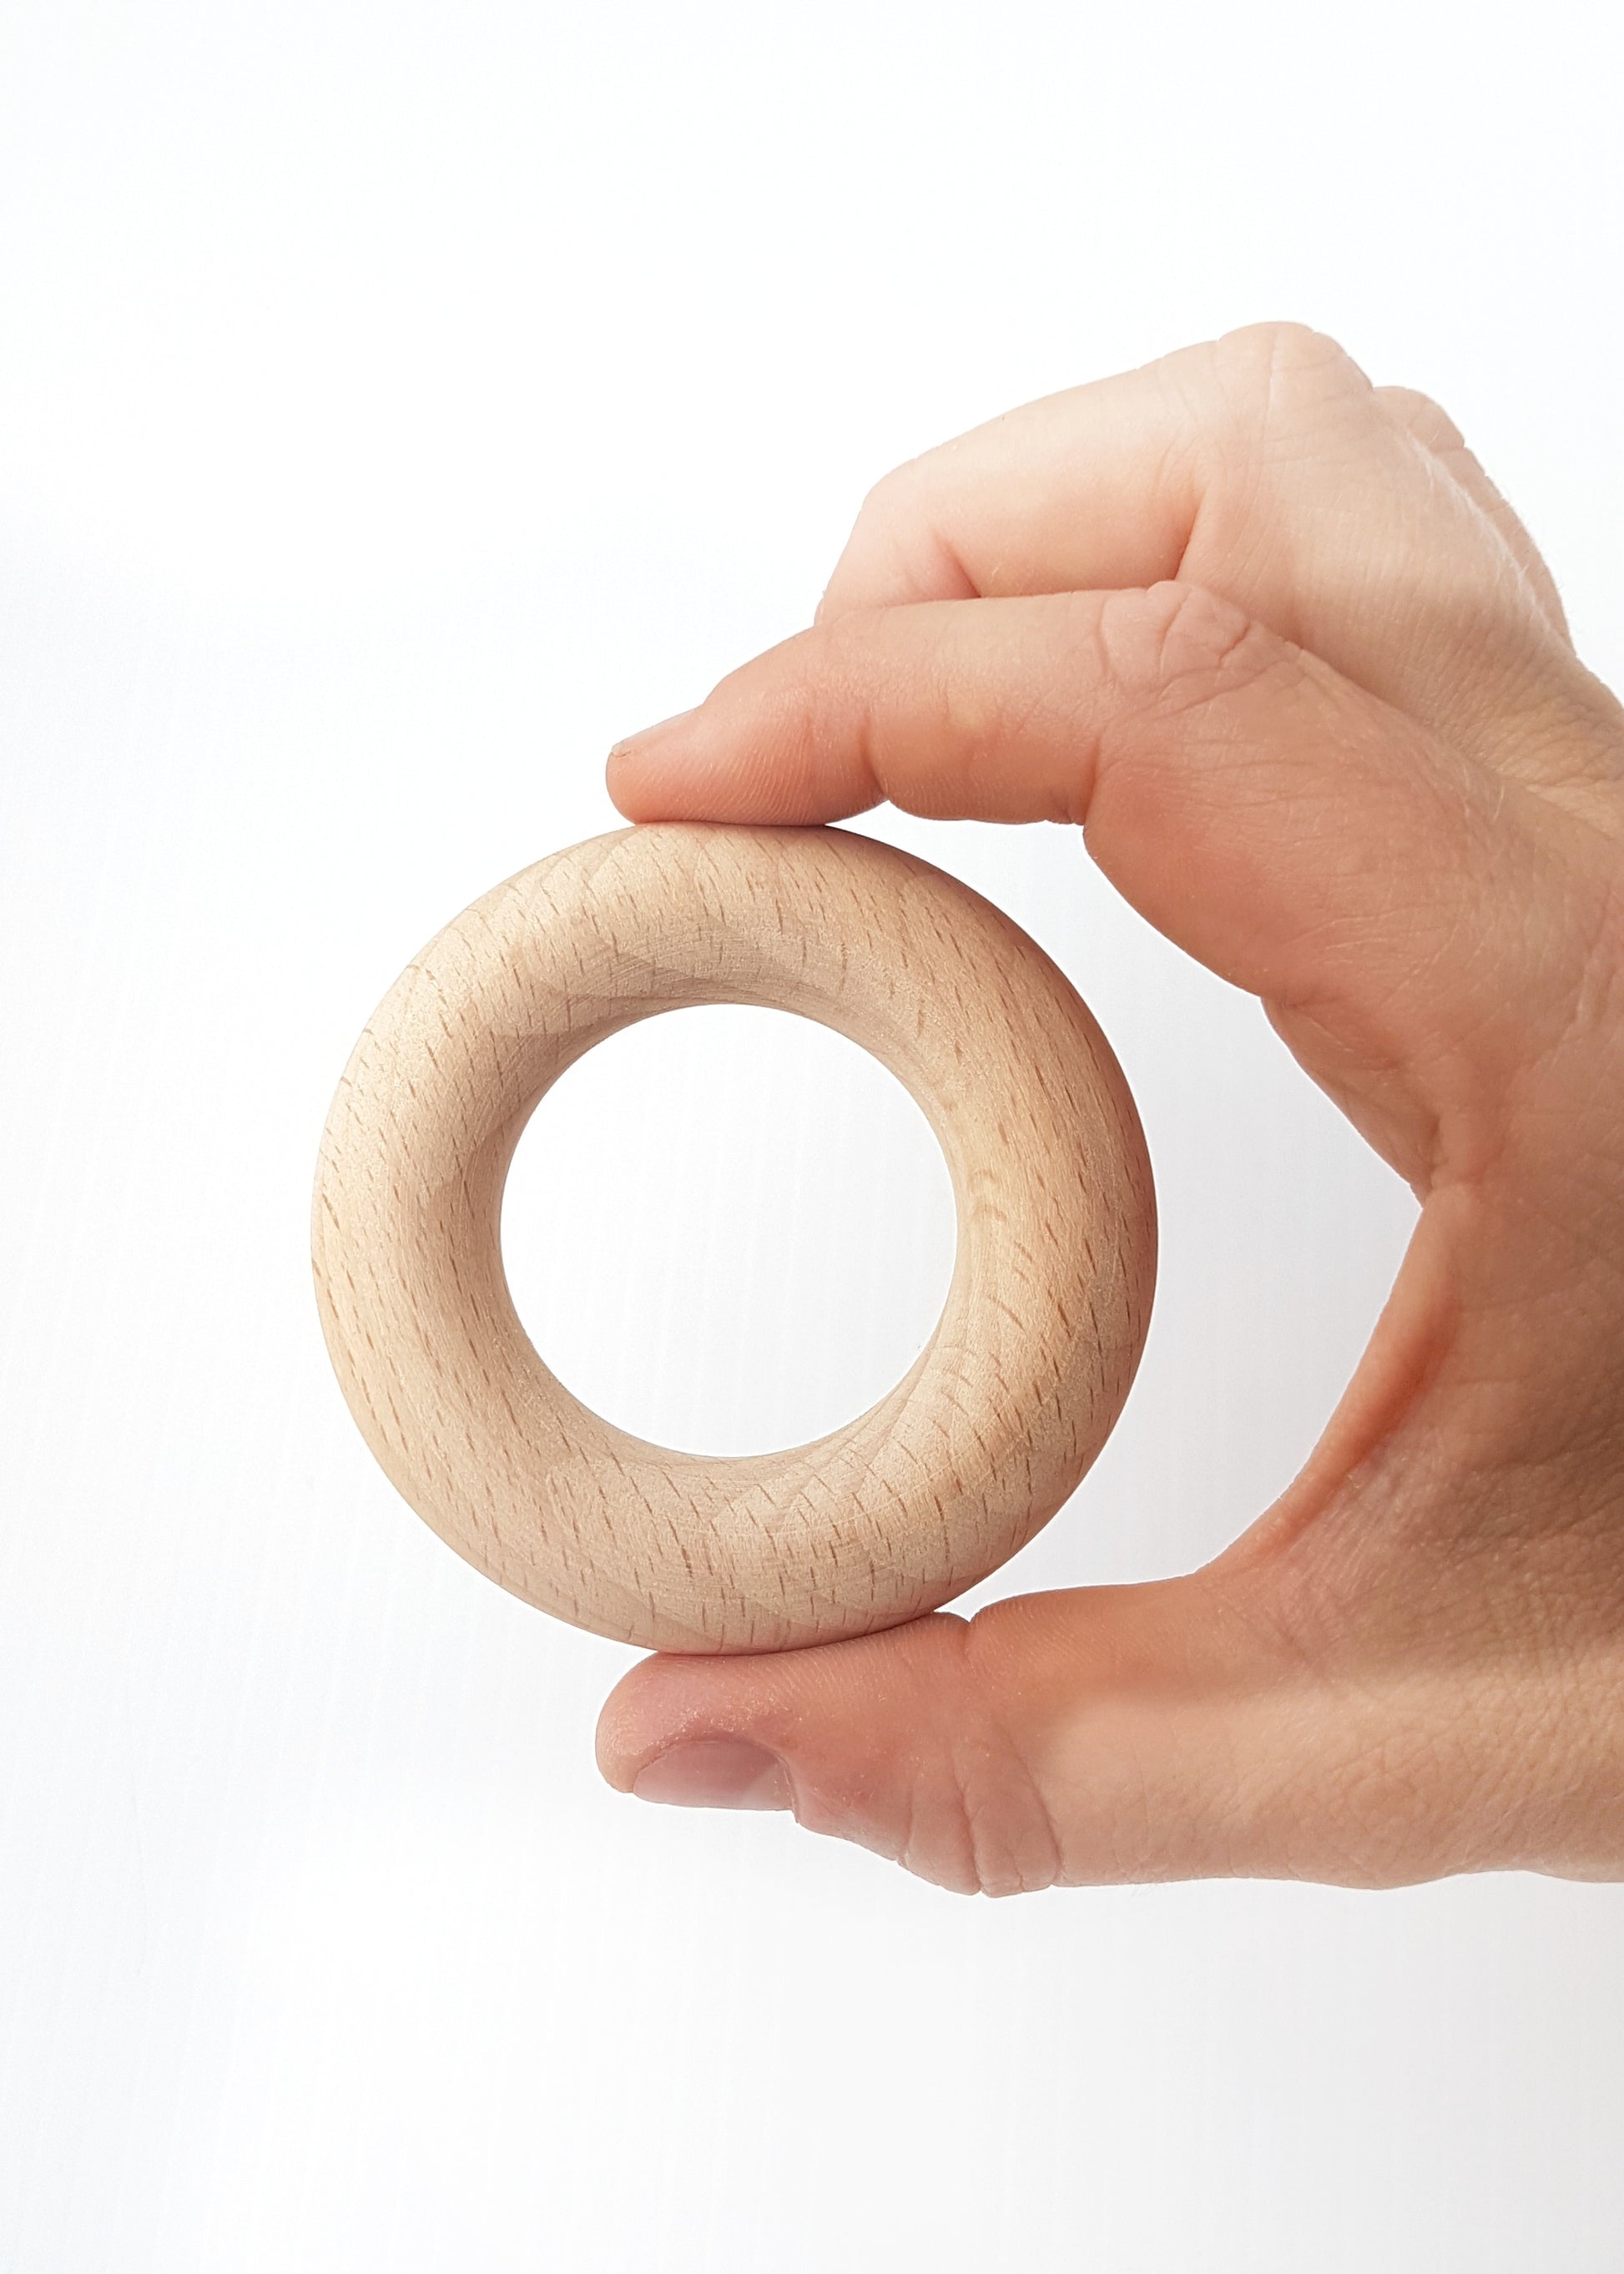 Natural beech timber rings for teething babies polished with organic beeswax and olive oil or coconut oil to soothe sore gums.